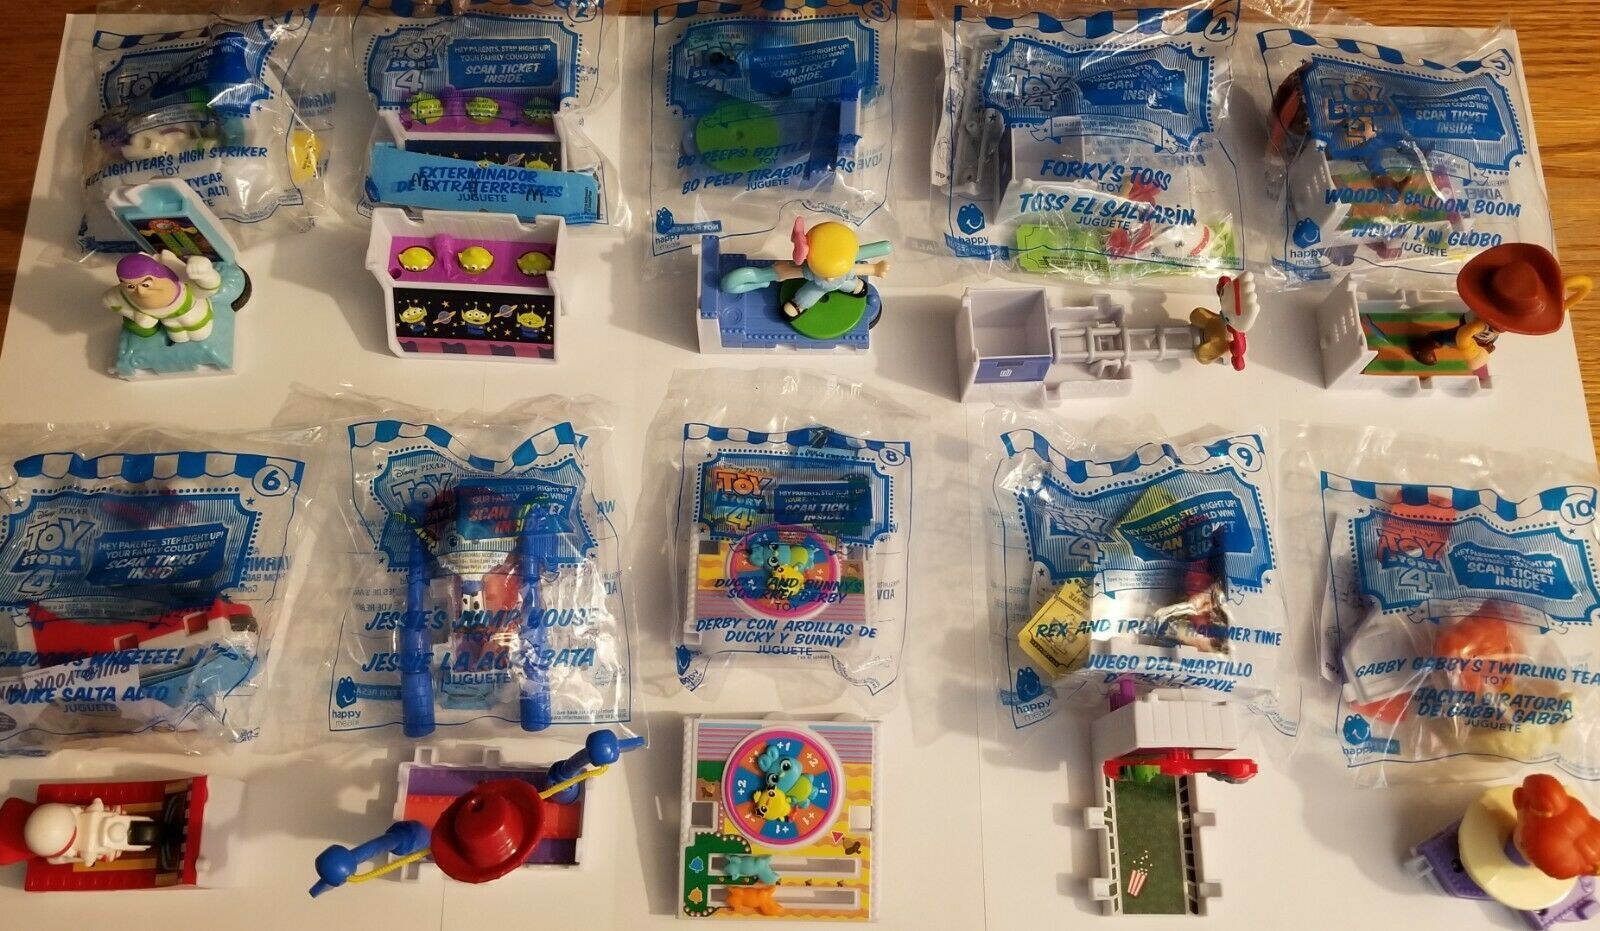 toy story 4 mcdonalds happy meal toys